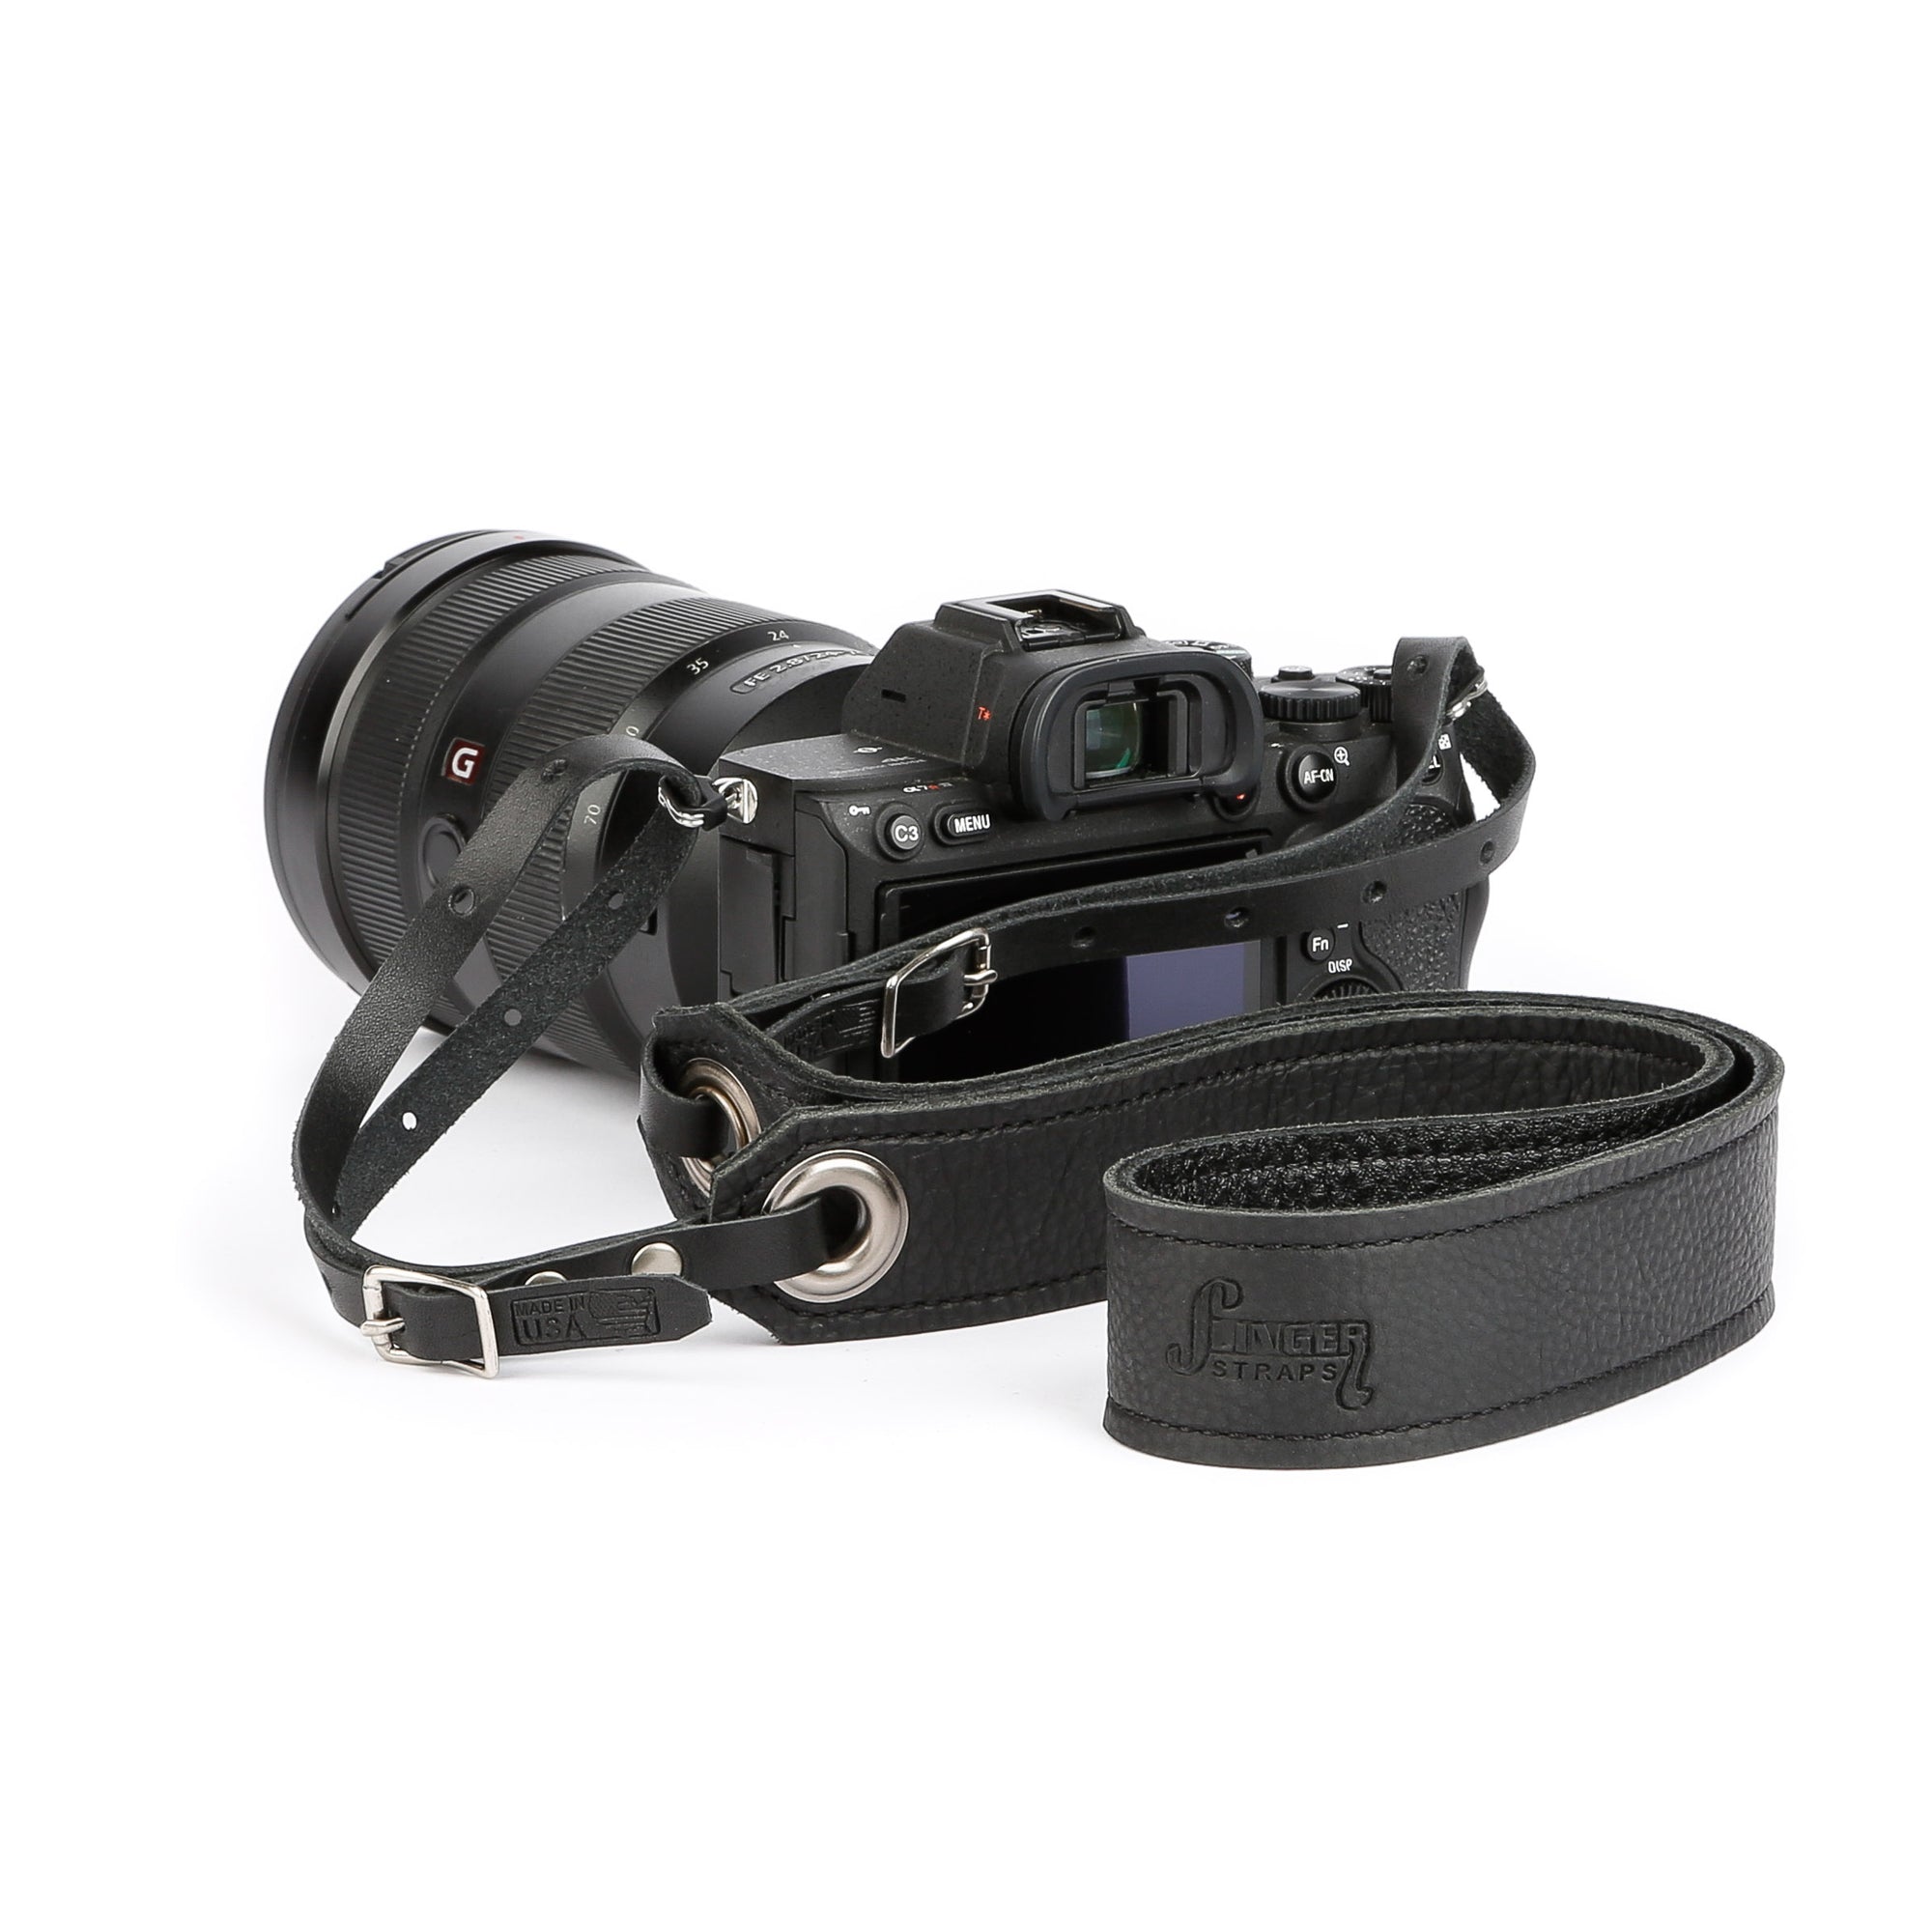 soft black leather camera strap with black leather end straps and brushed nickel grommets